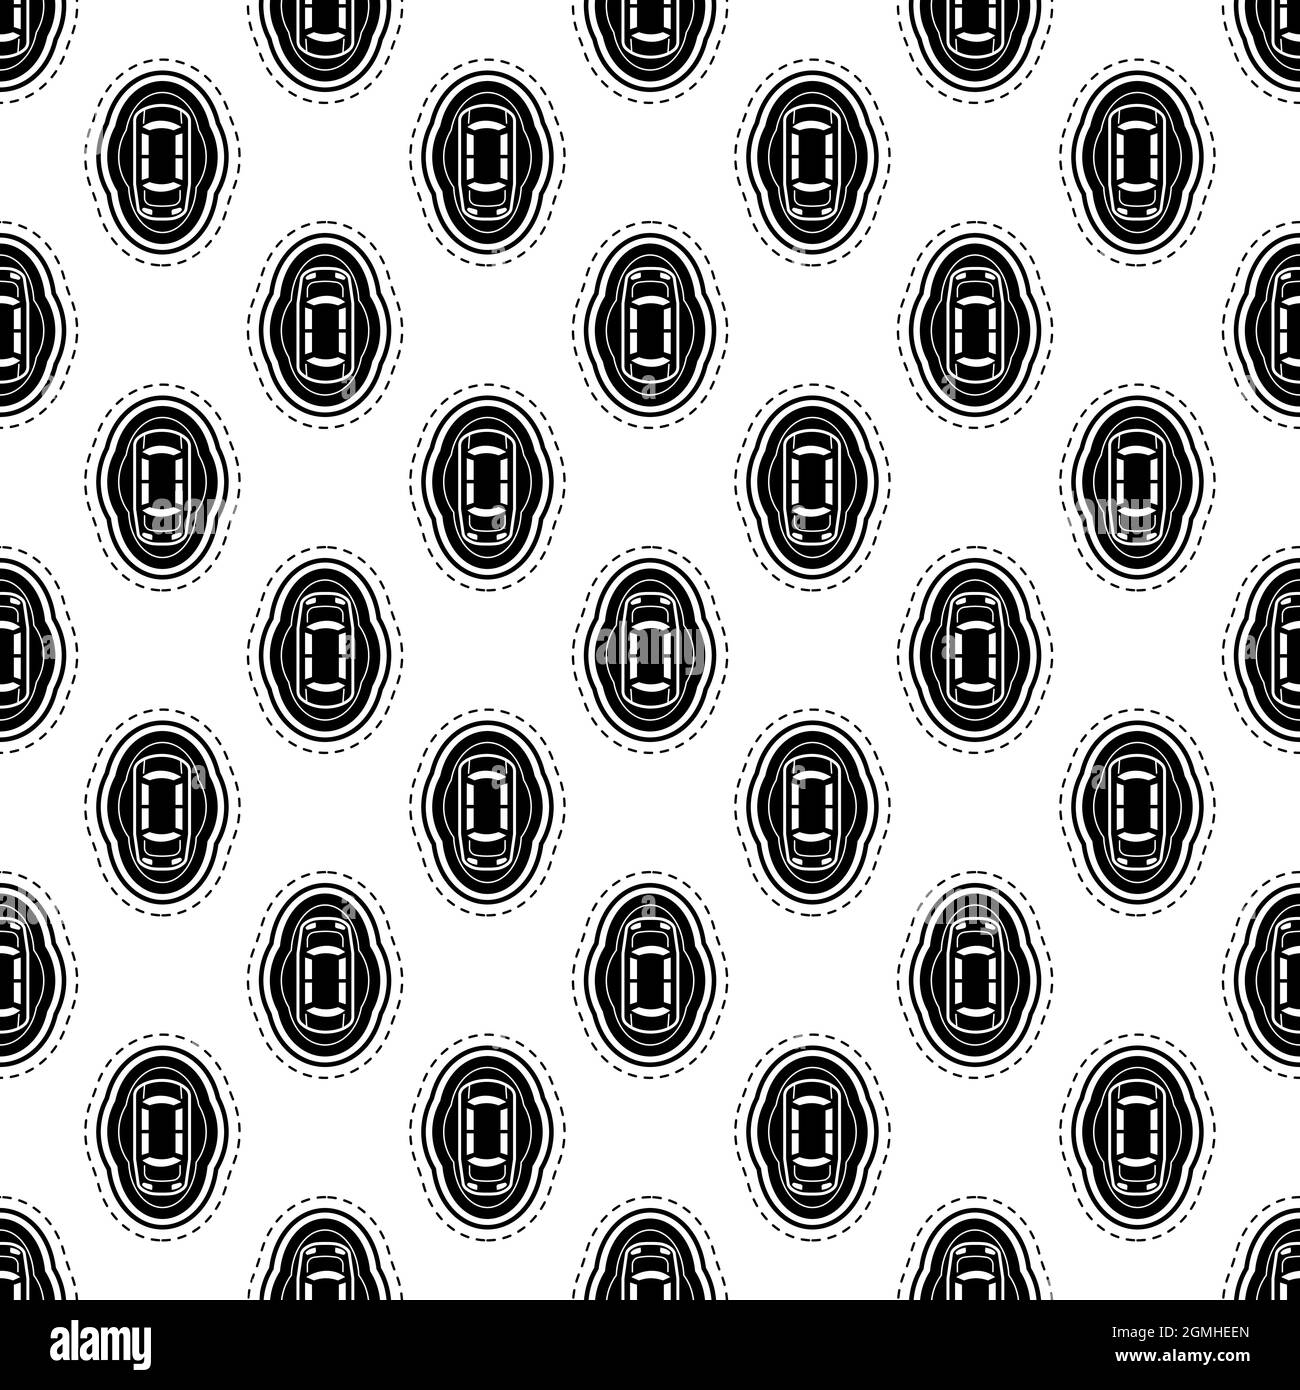 Driverless car top view pattern seamless background texture repeat wallpaper geometric vector Stock Vector